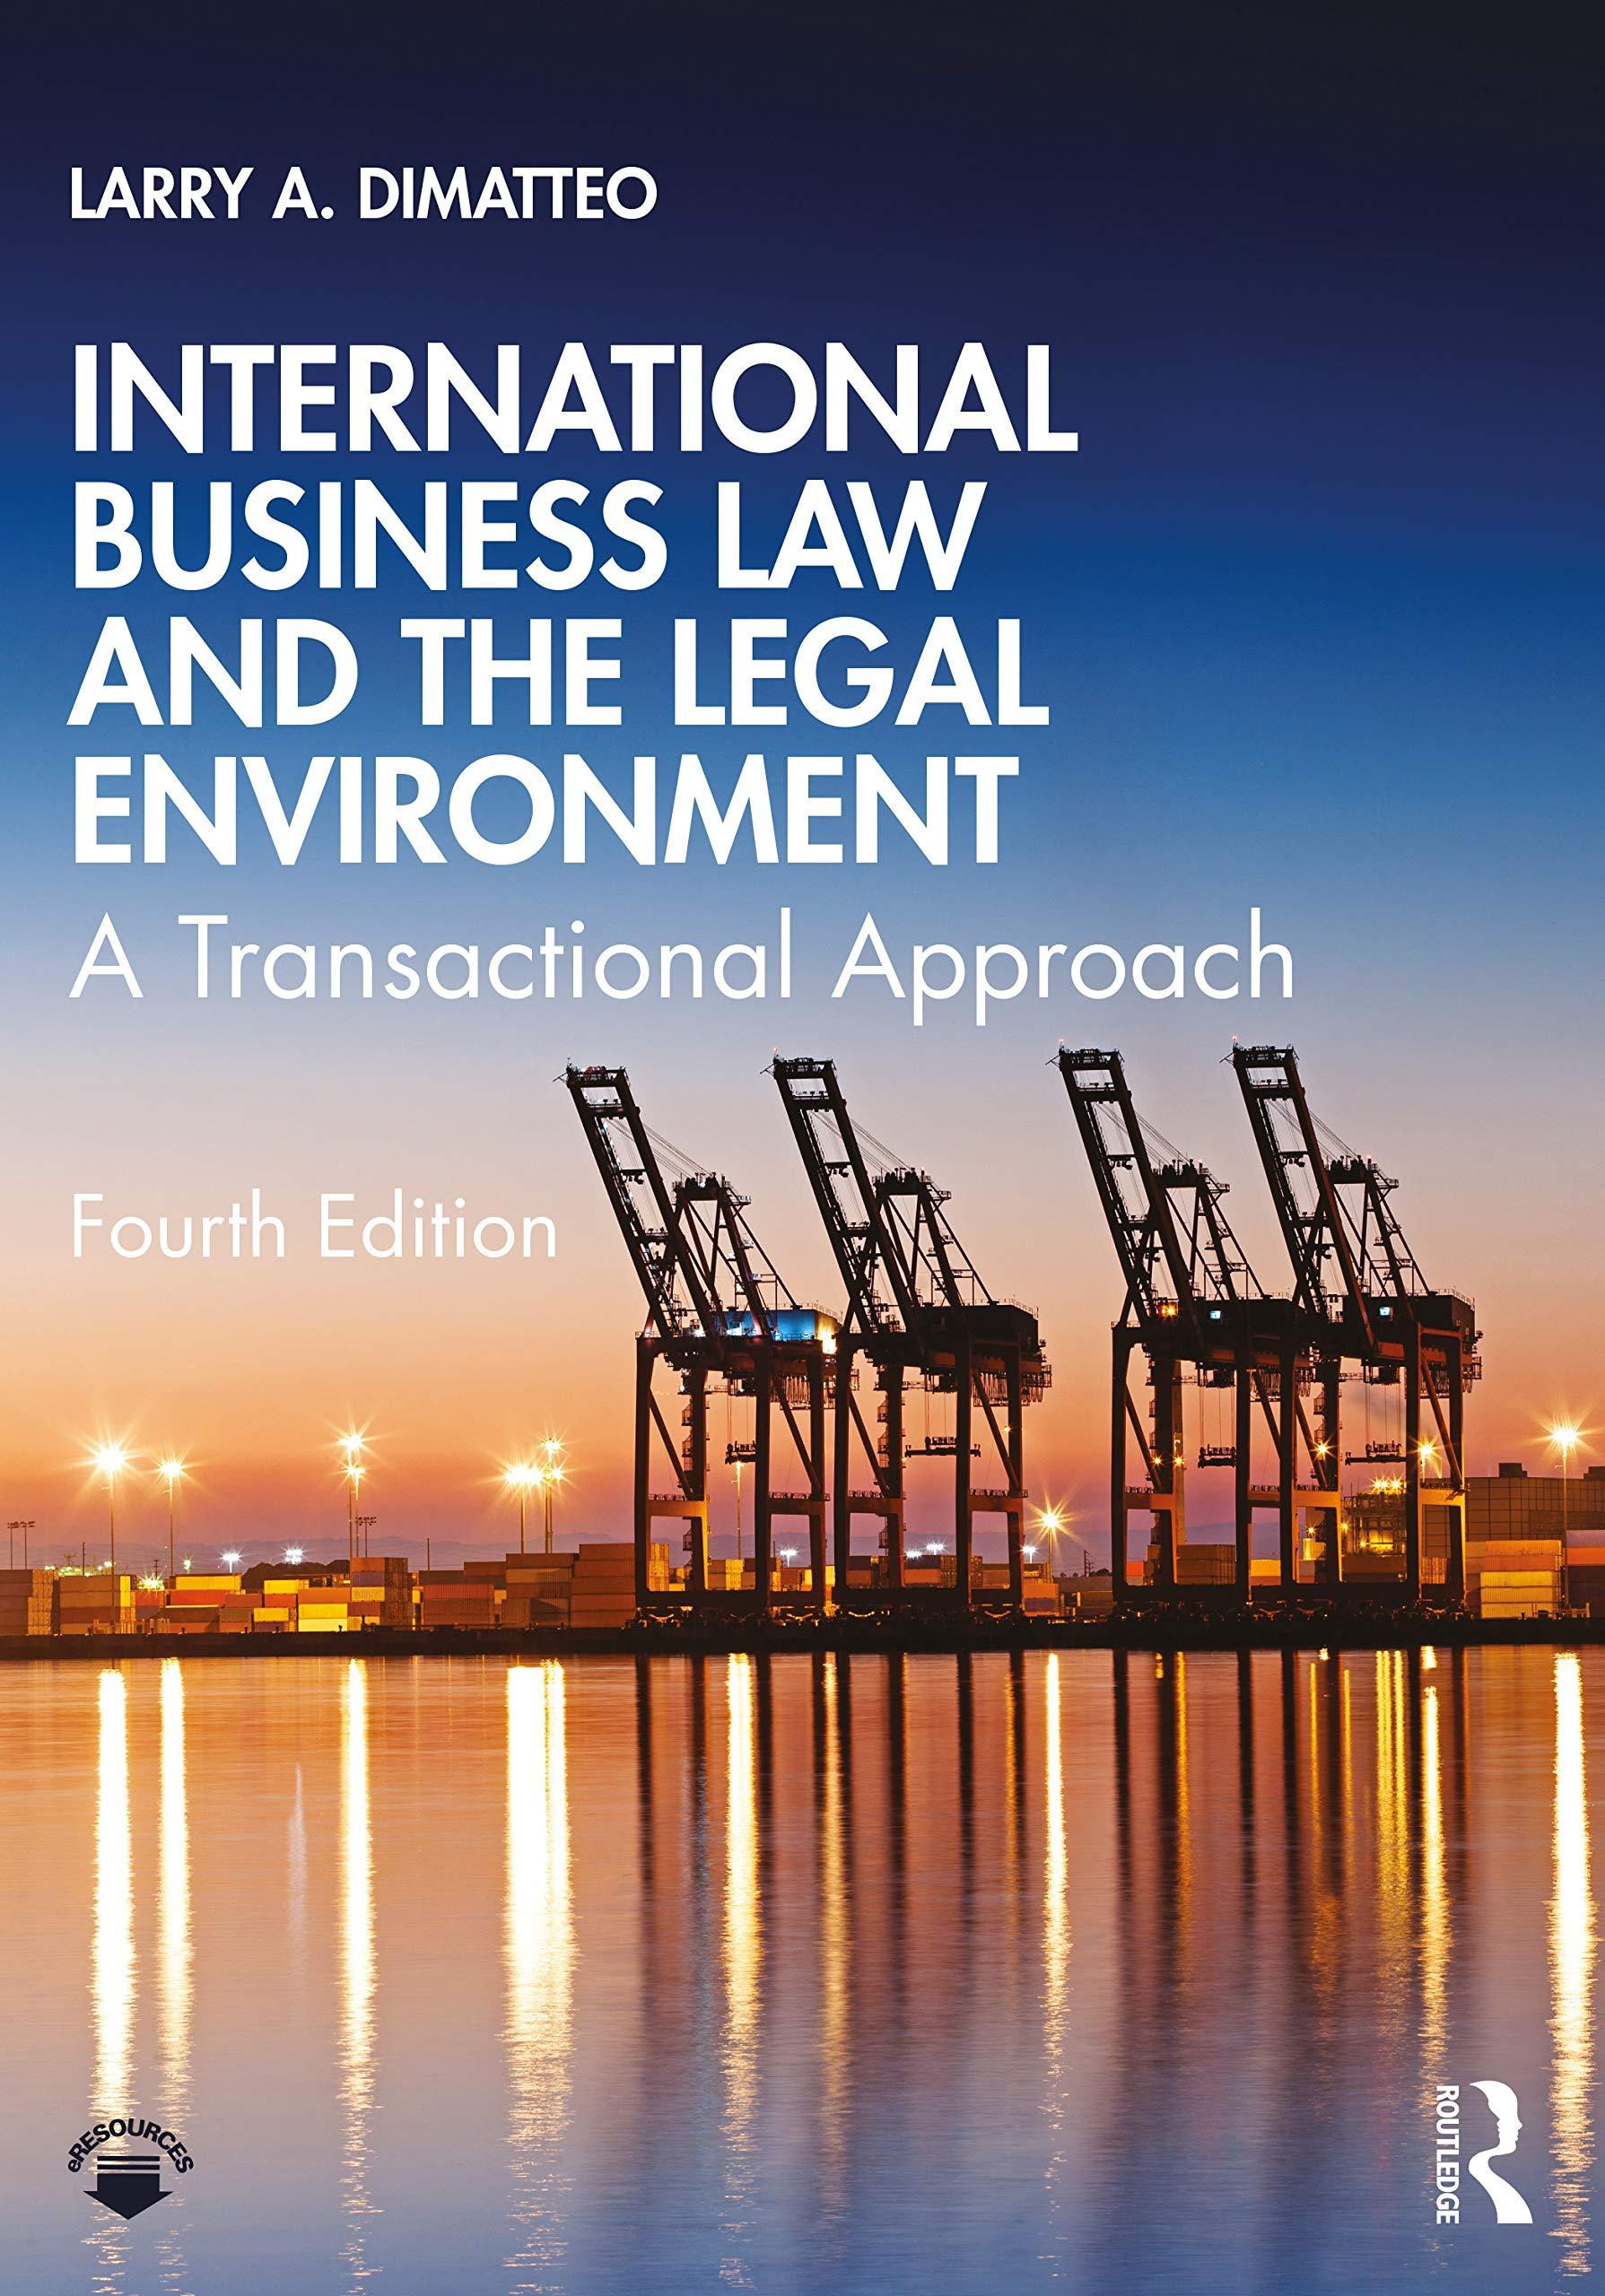 international business law and the legal environment a transactional approach 4th edition larry a. dimatteo